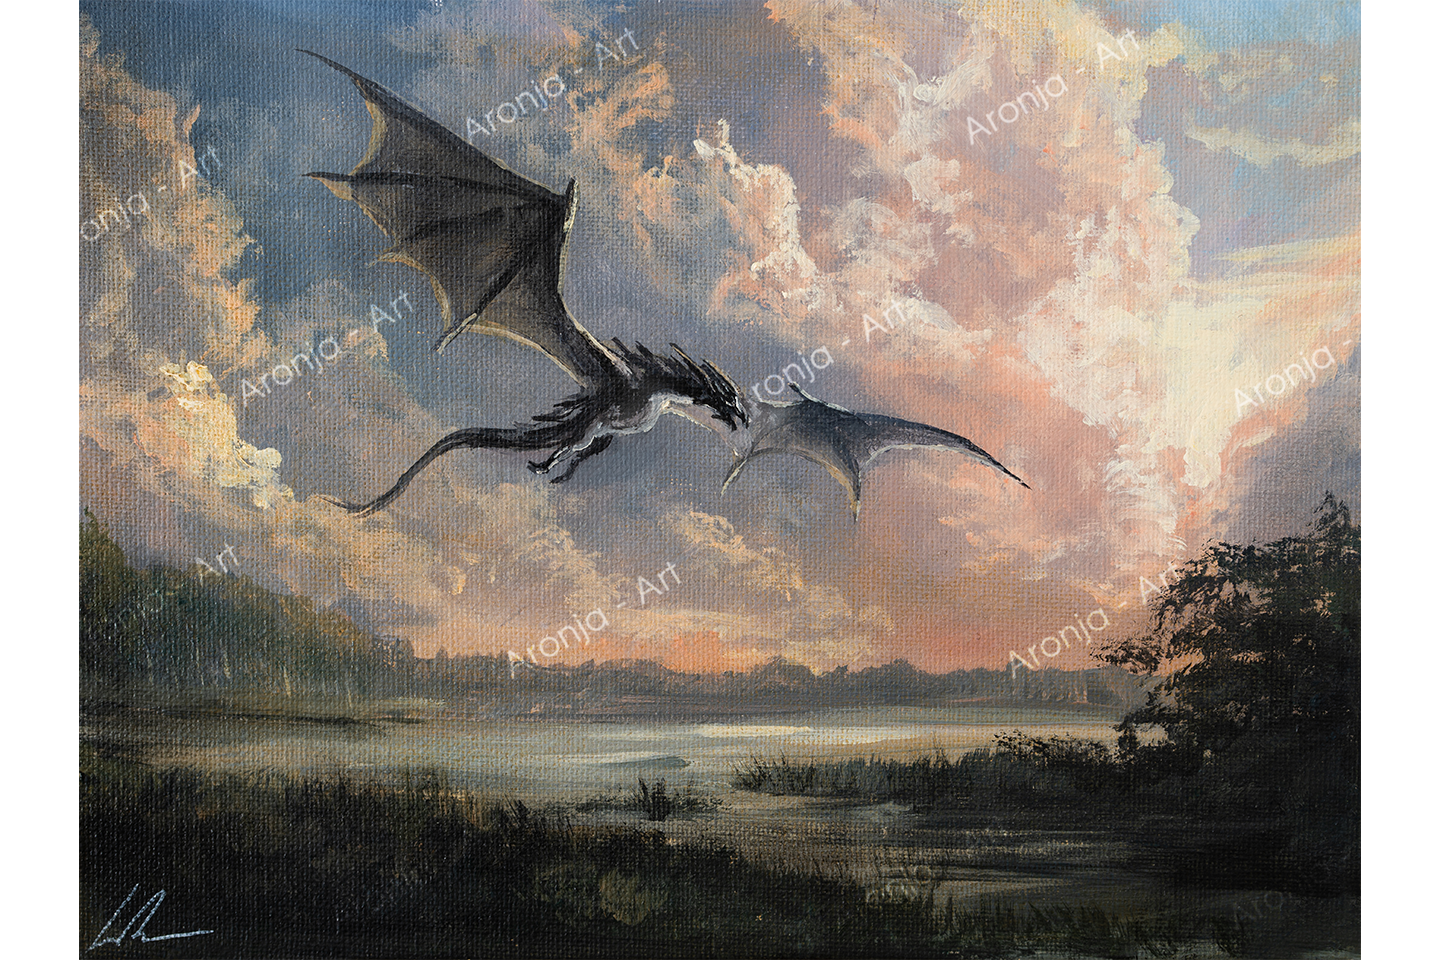 Dragon above Swamp - Framed Acrylic painting